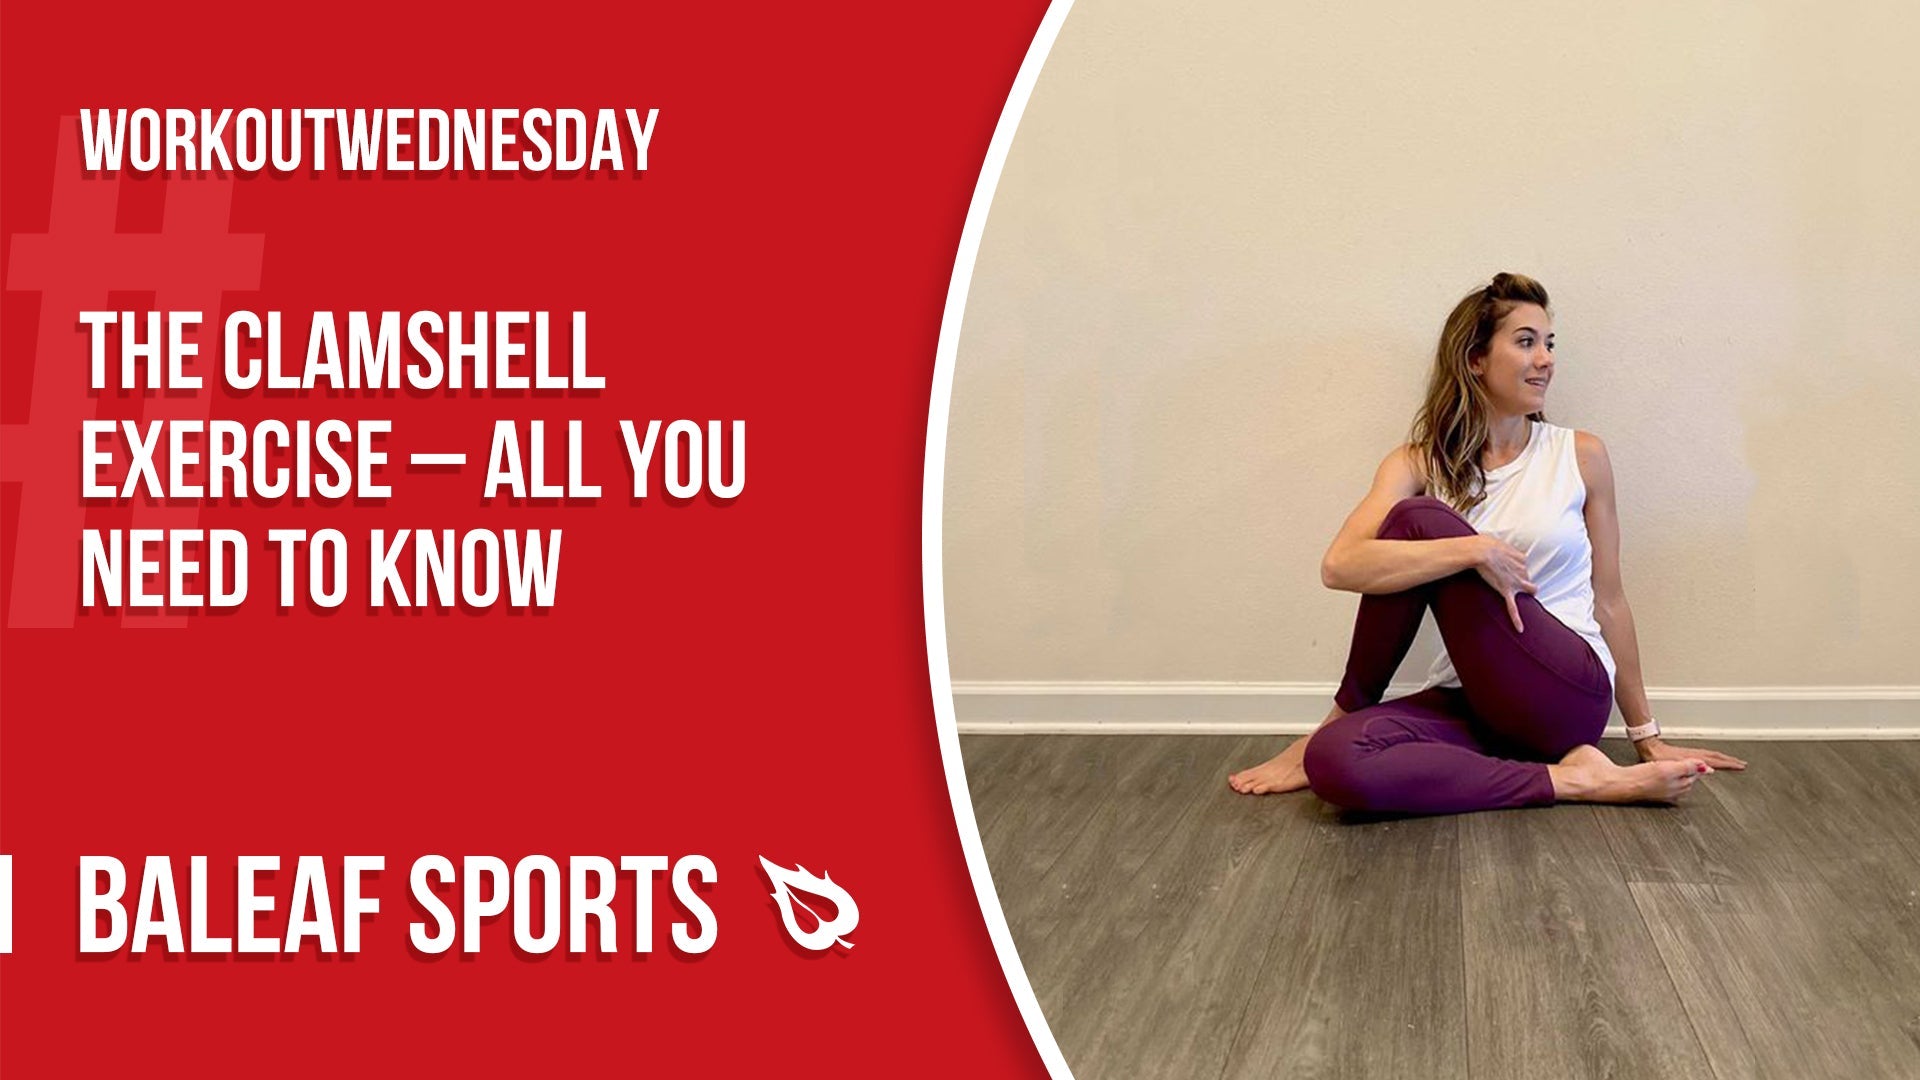 The Clamshell Exercise – All You Need To Know